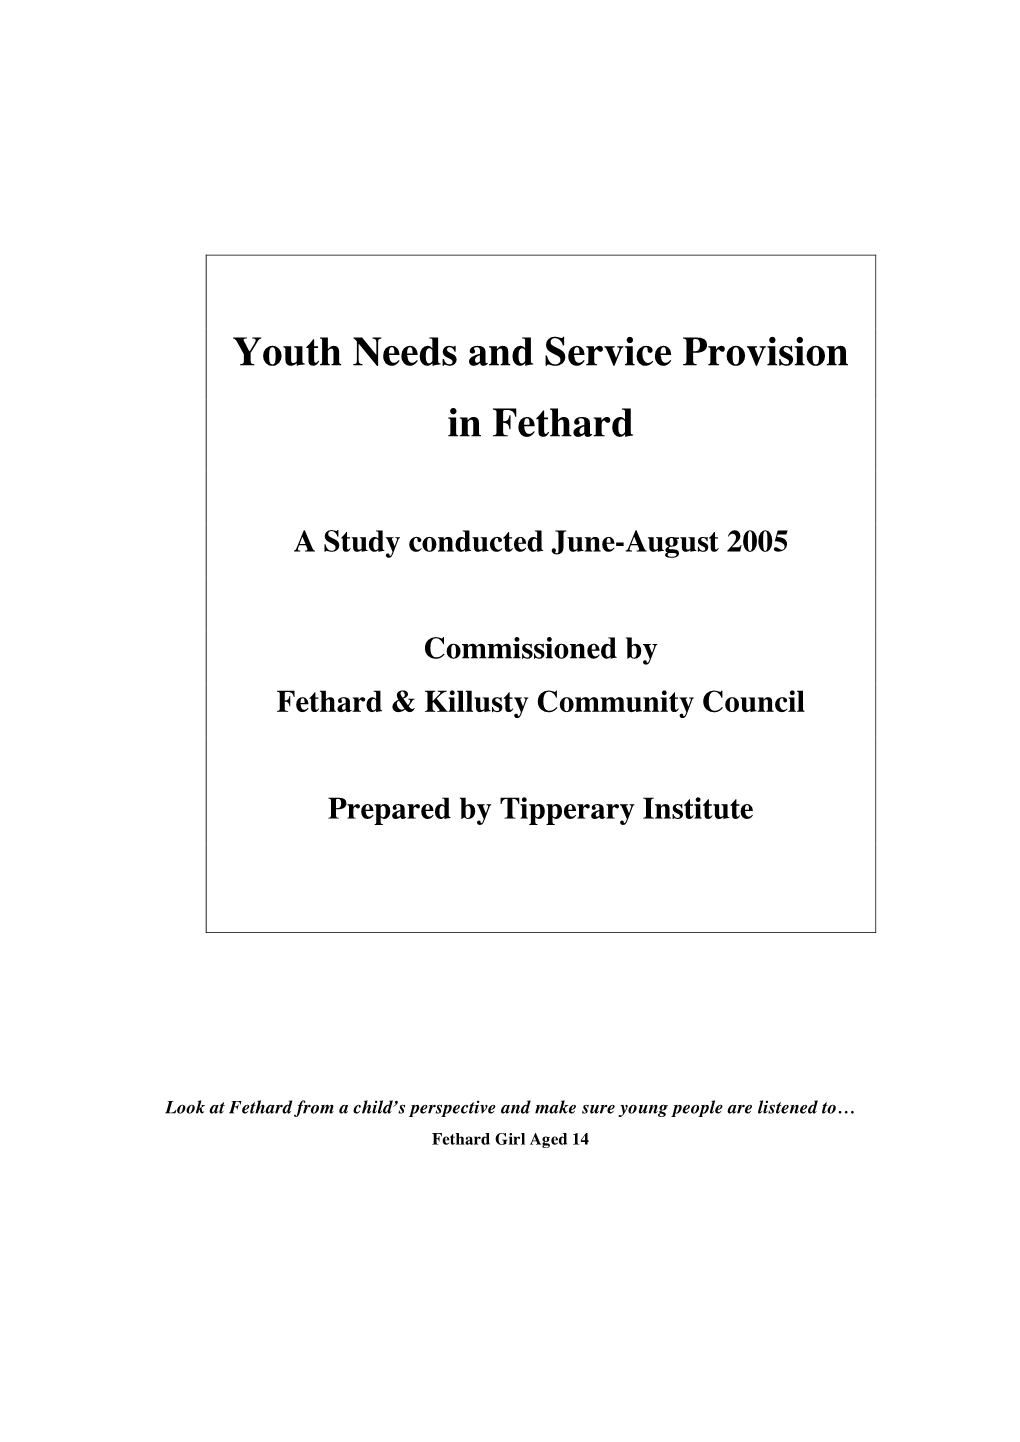 Youth Needs and Service Provision in Fethard